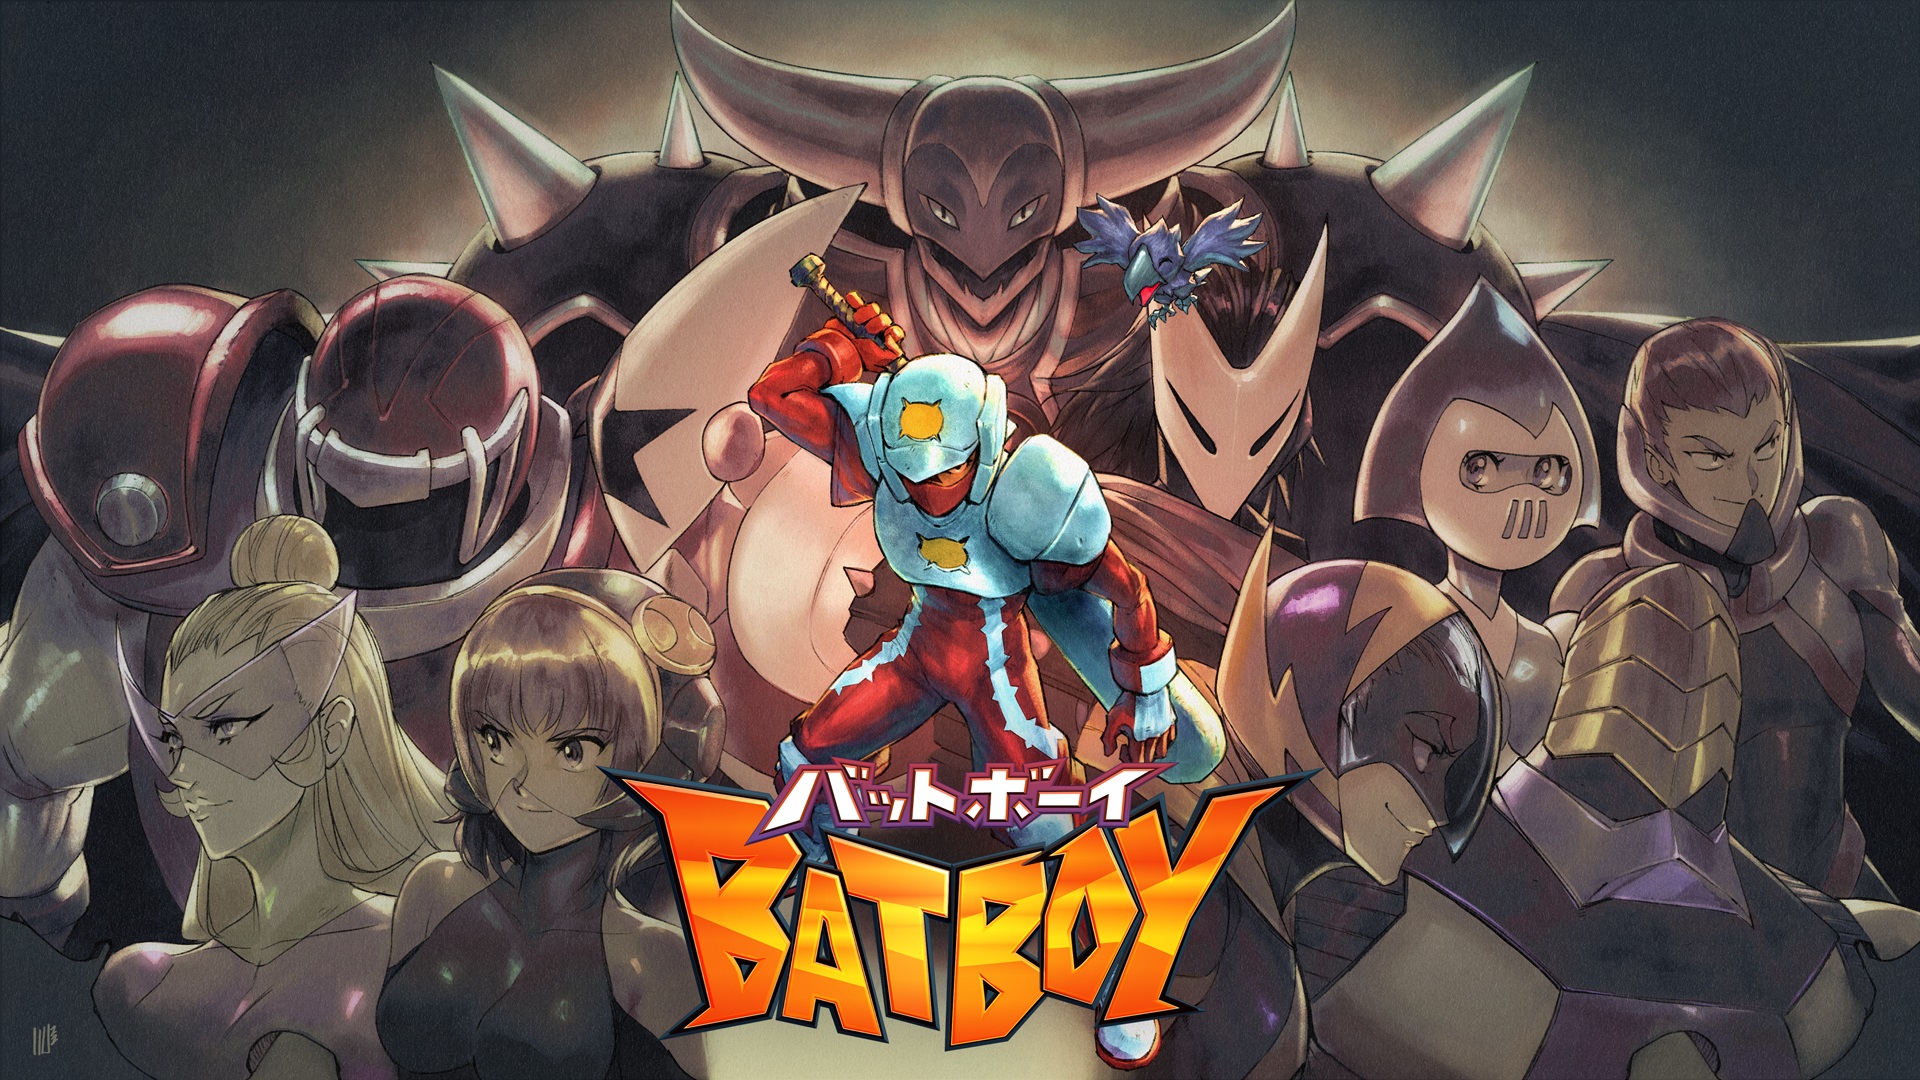 Nostalgic retro action-adventure game Bat Boy launches in May